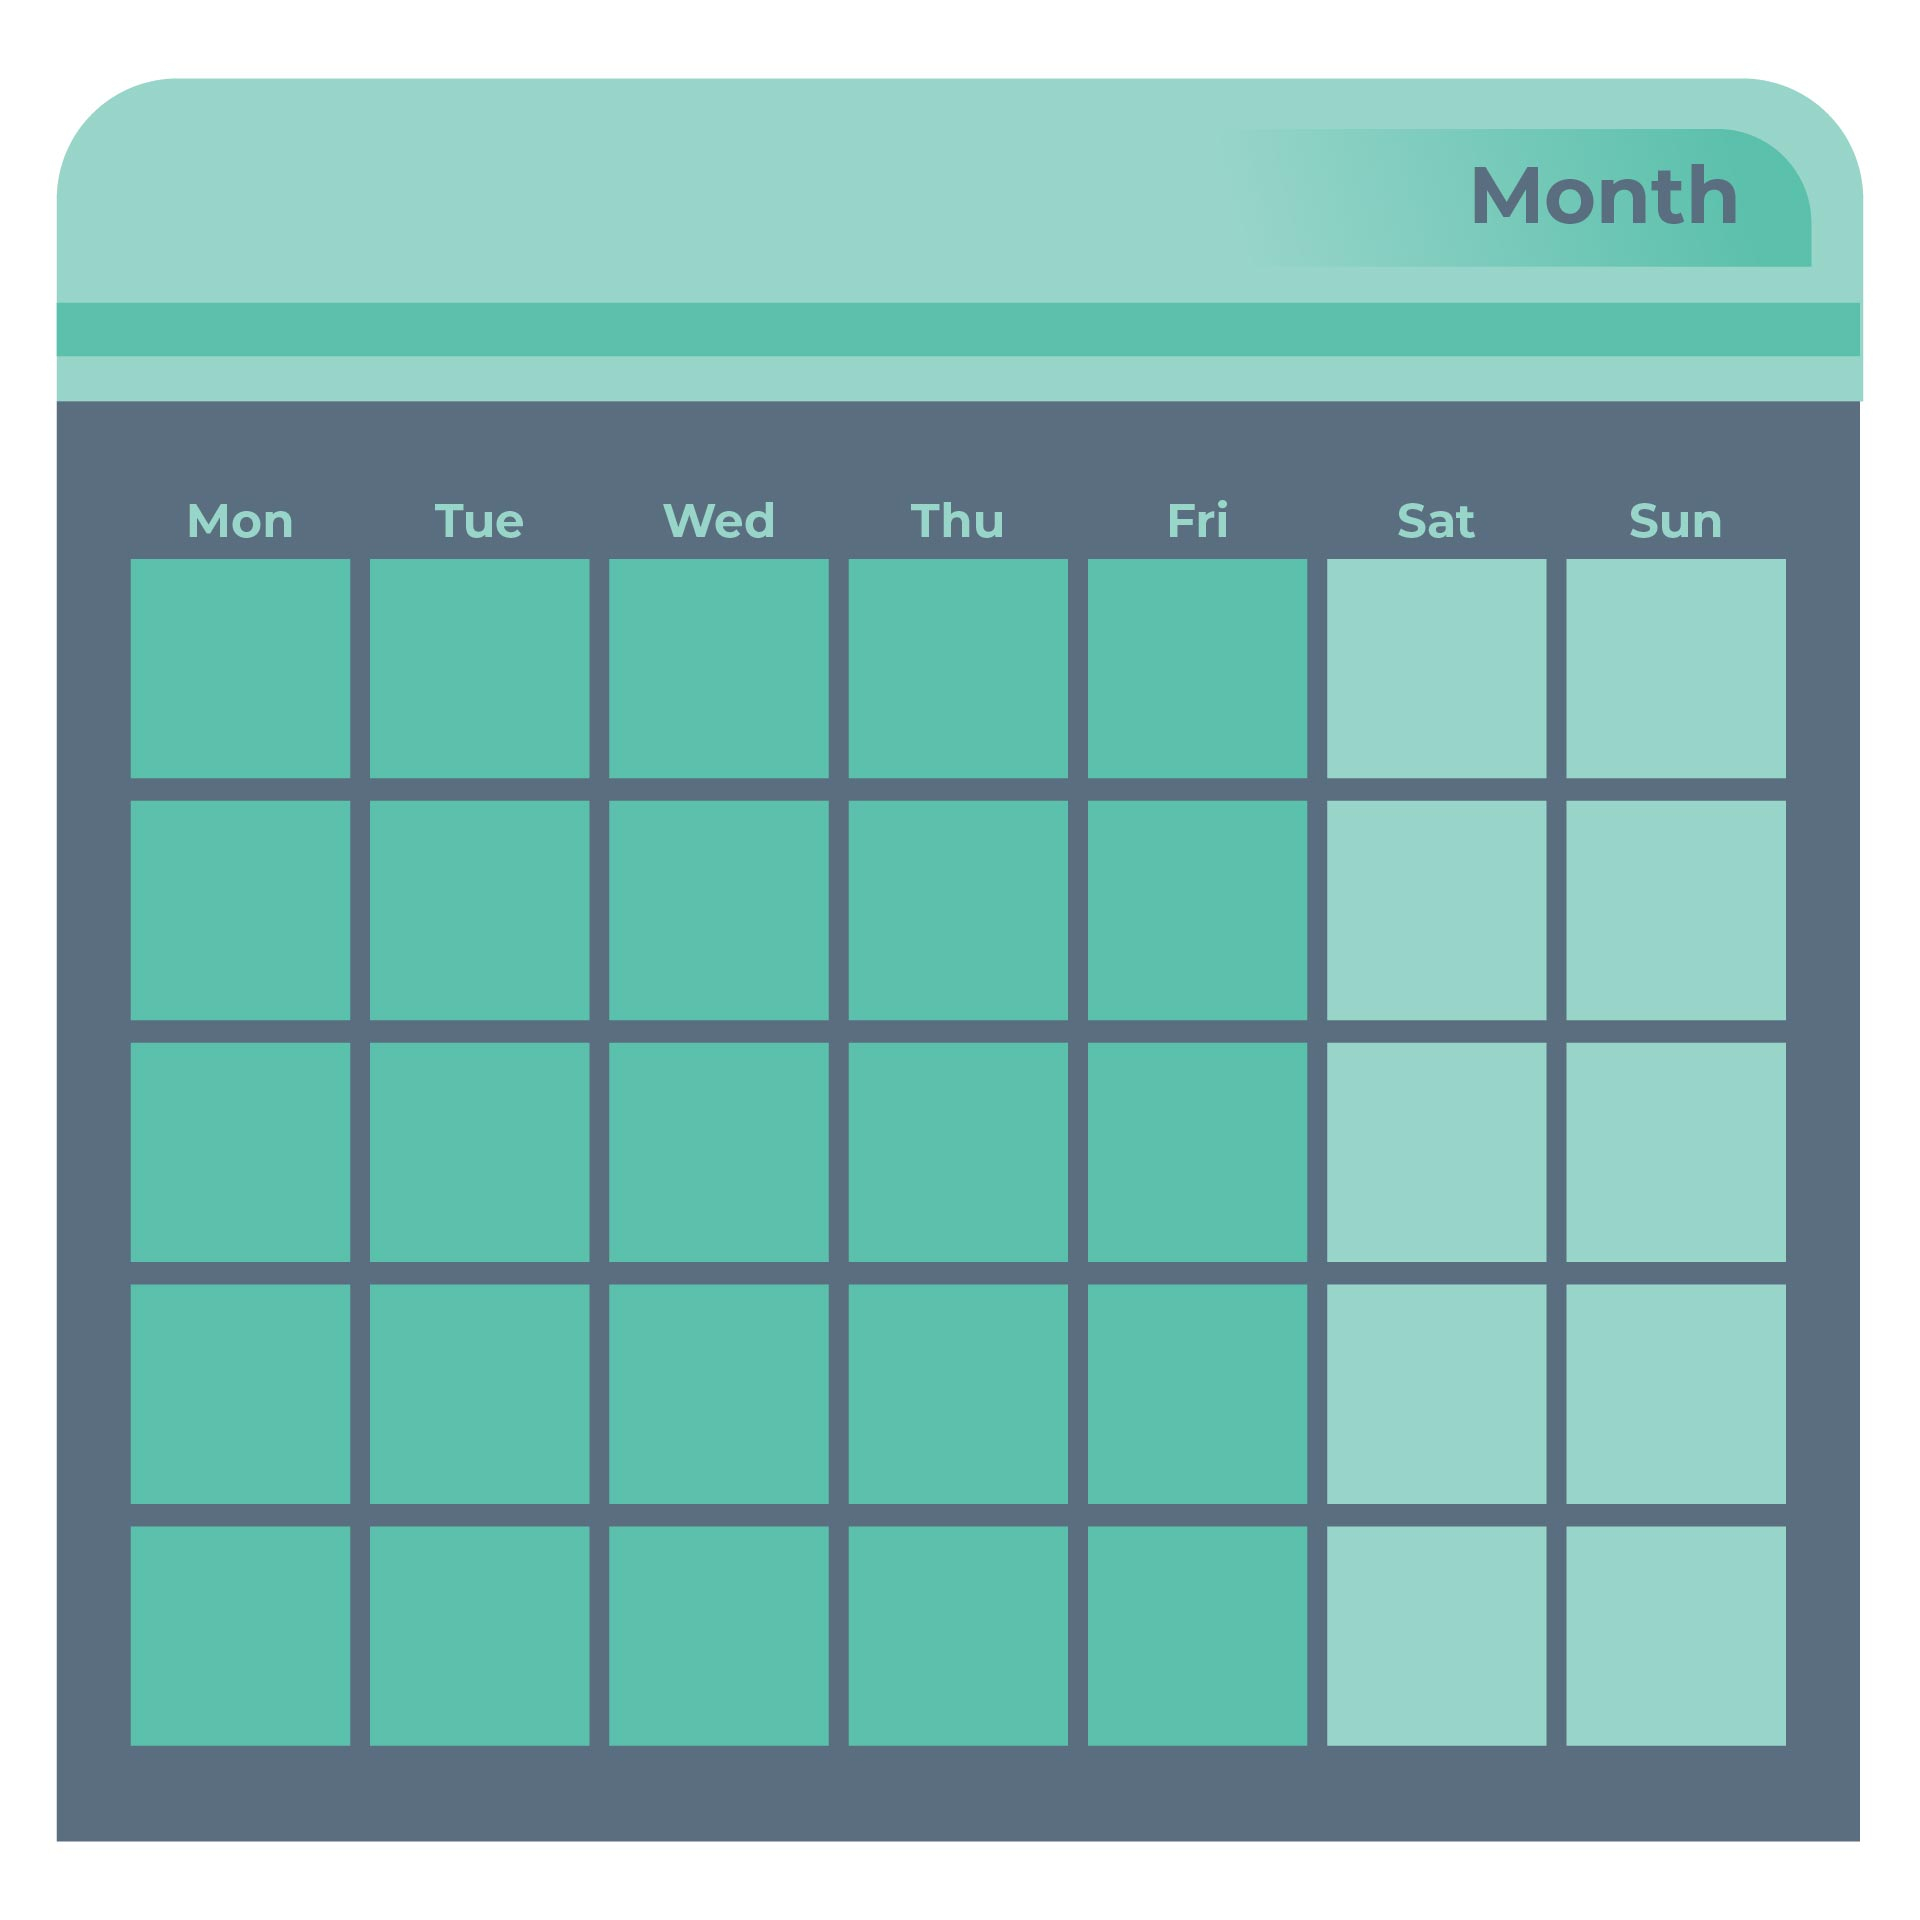 10 Best Monday Through Friday Planner Printable Free Monthly Templates Starting Monday